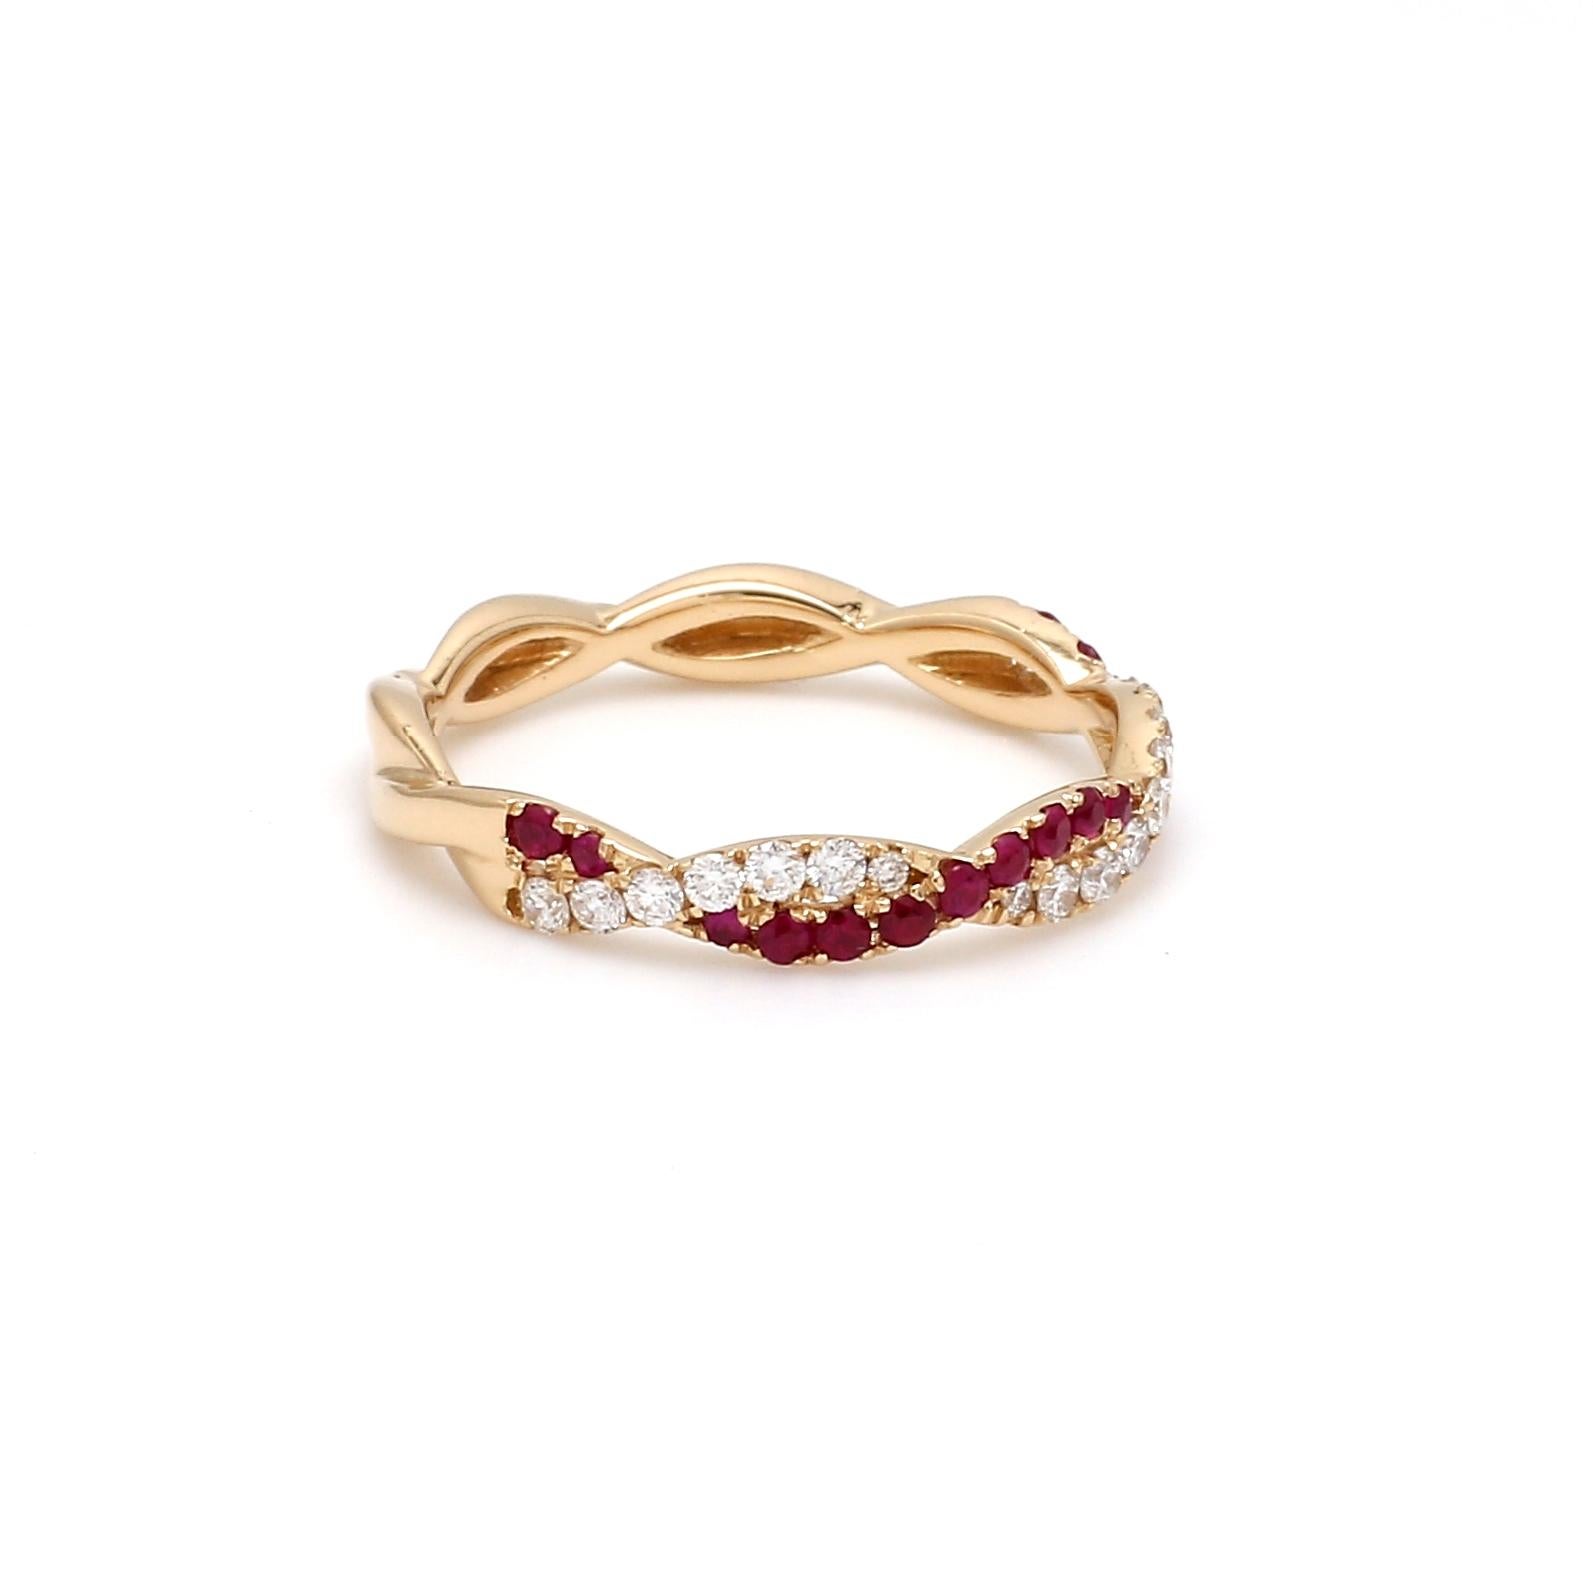 A Beautiful Handcrafted Twisted Ring in 18 Karat Yellow Gold  with Natural Rubies and Diamonds on Shank in a Twisted shank. A perfect Ring for occasion

Ruby Details
Pieces : 18 Pieces Emerald Cut 
Weight : 0.23 Carat 
AAA Quality Rubies

Natural